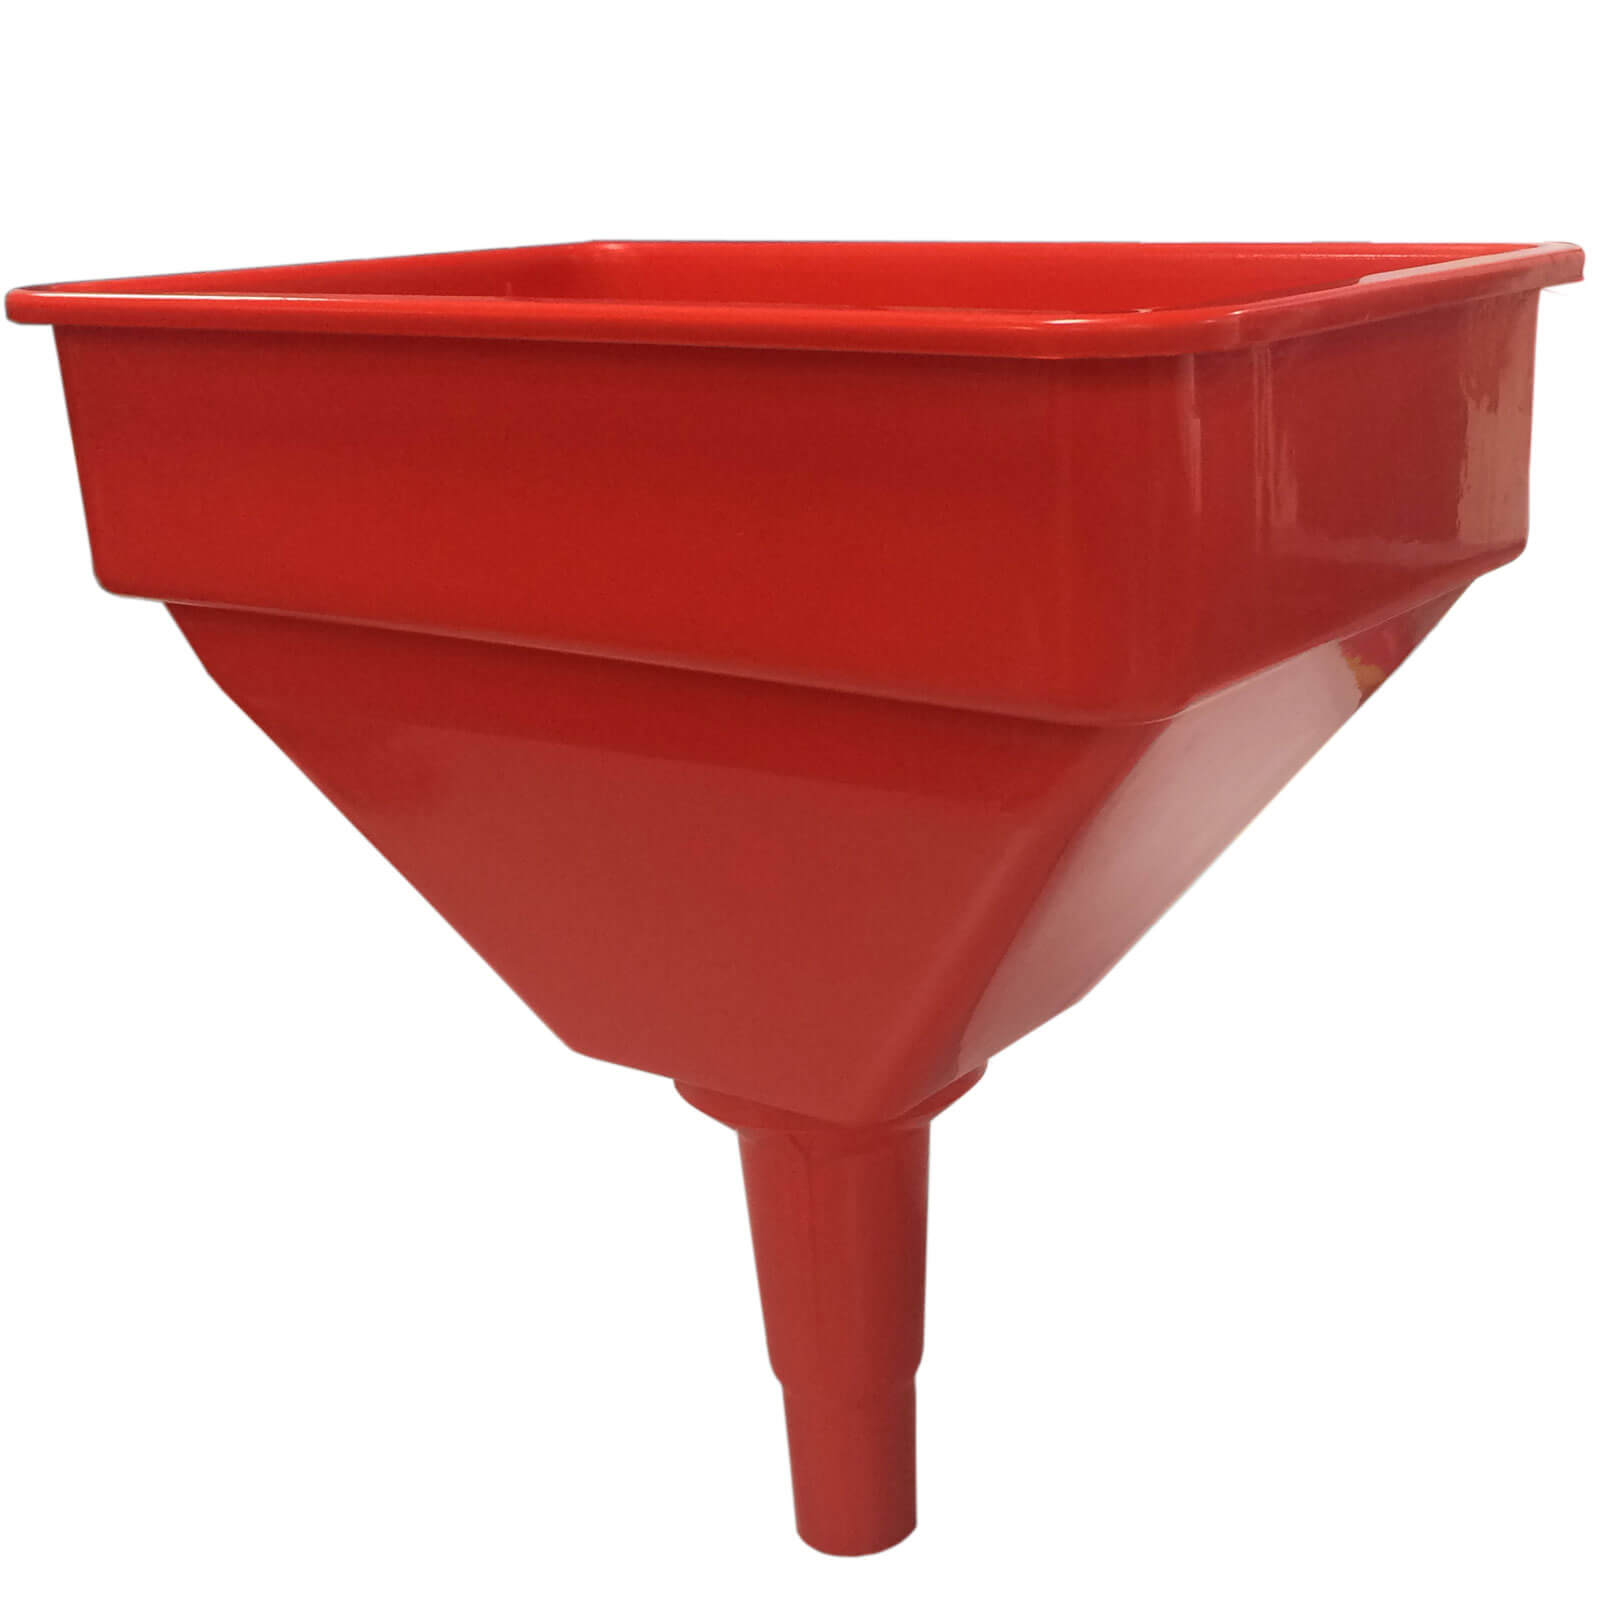 Image of Sirius 250mm Tractor/Garage Funnel